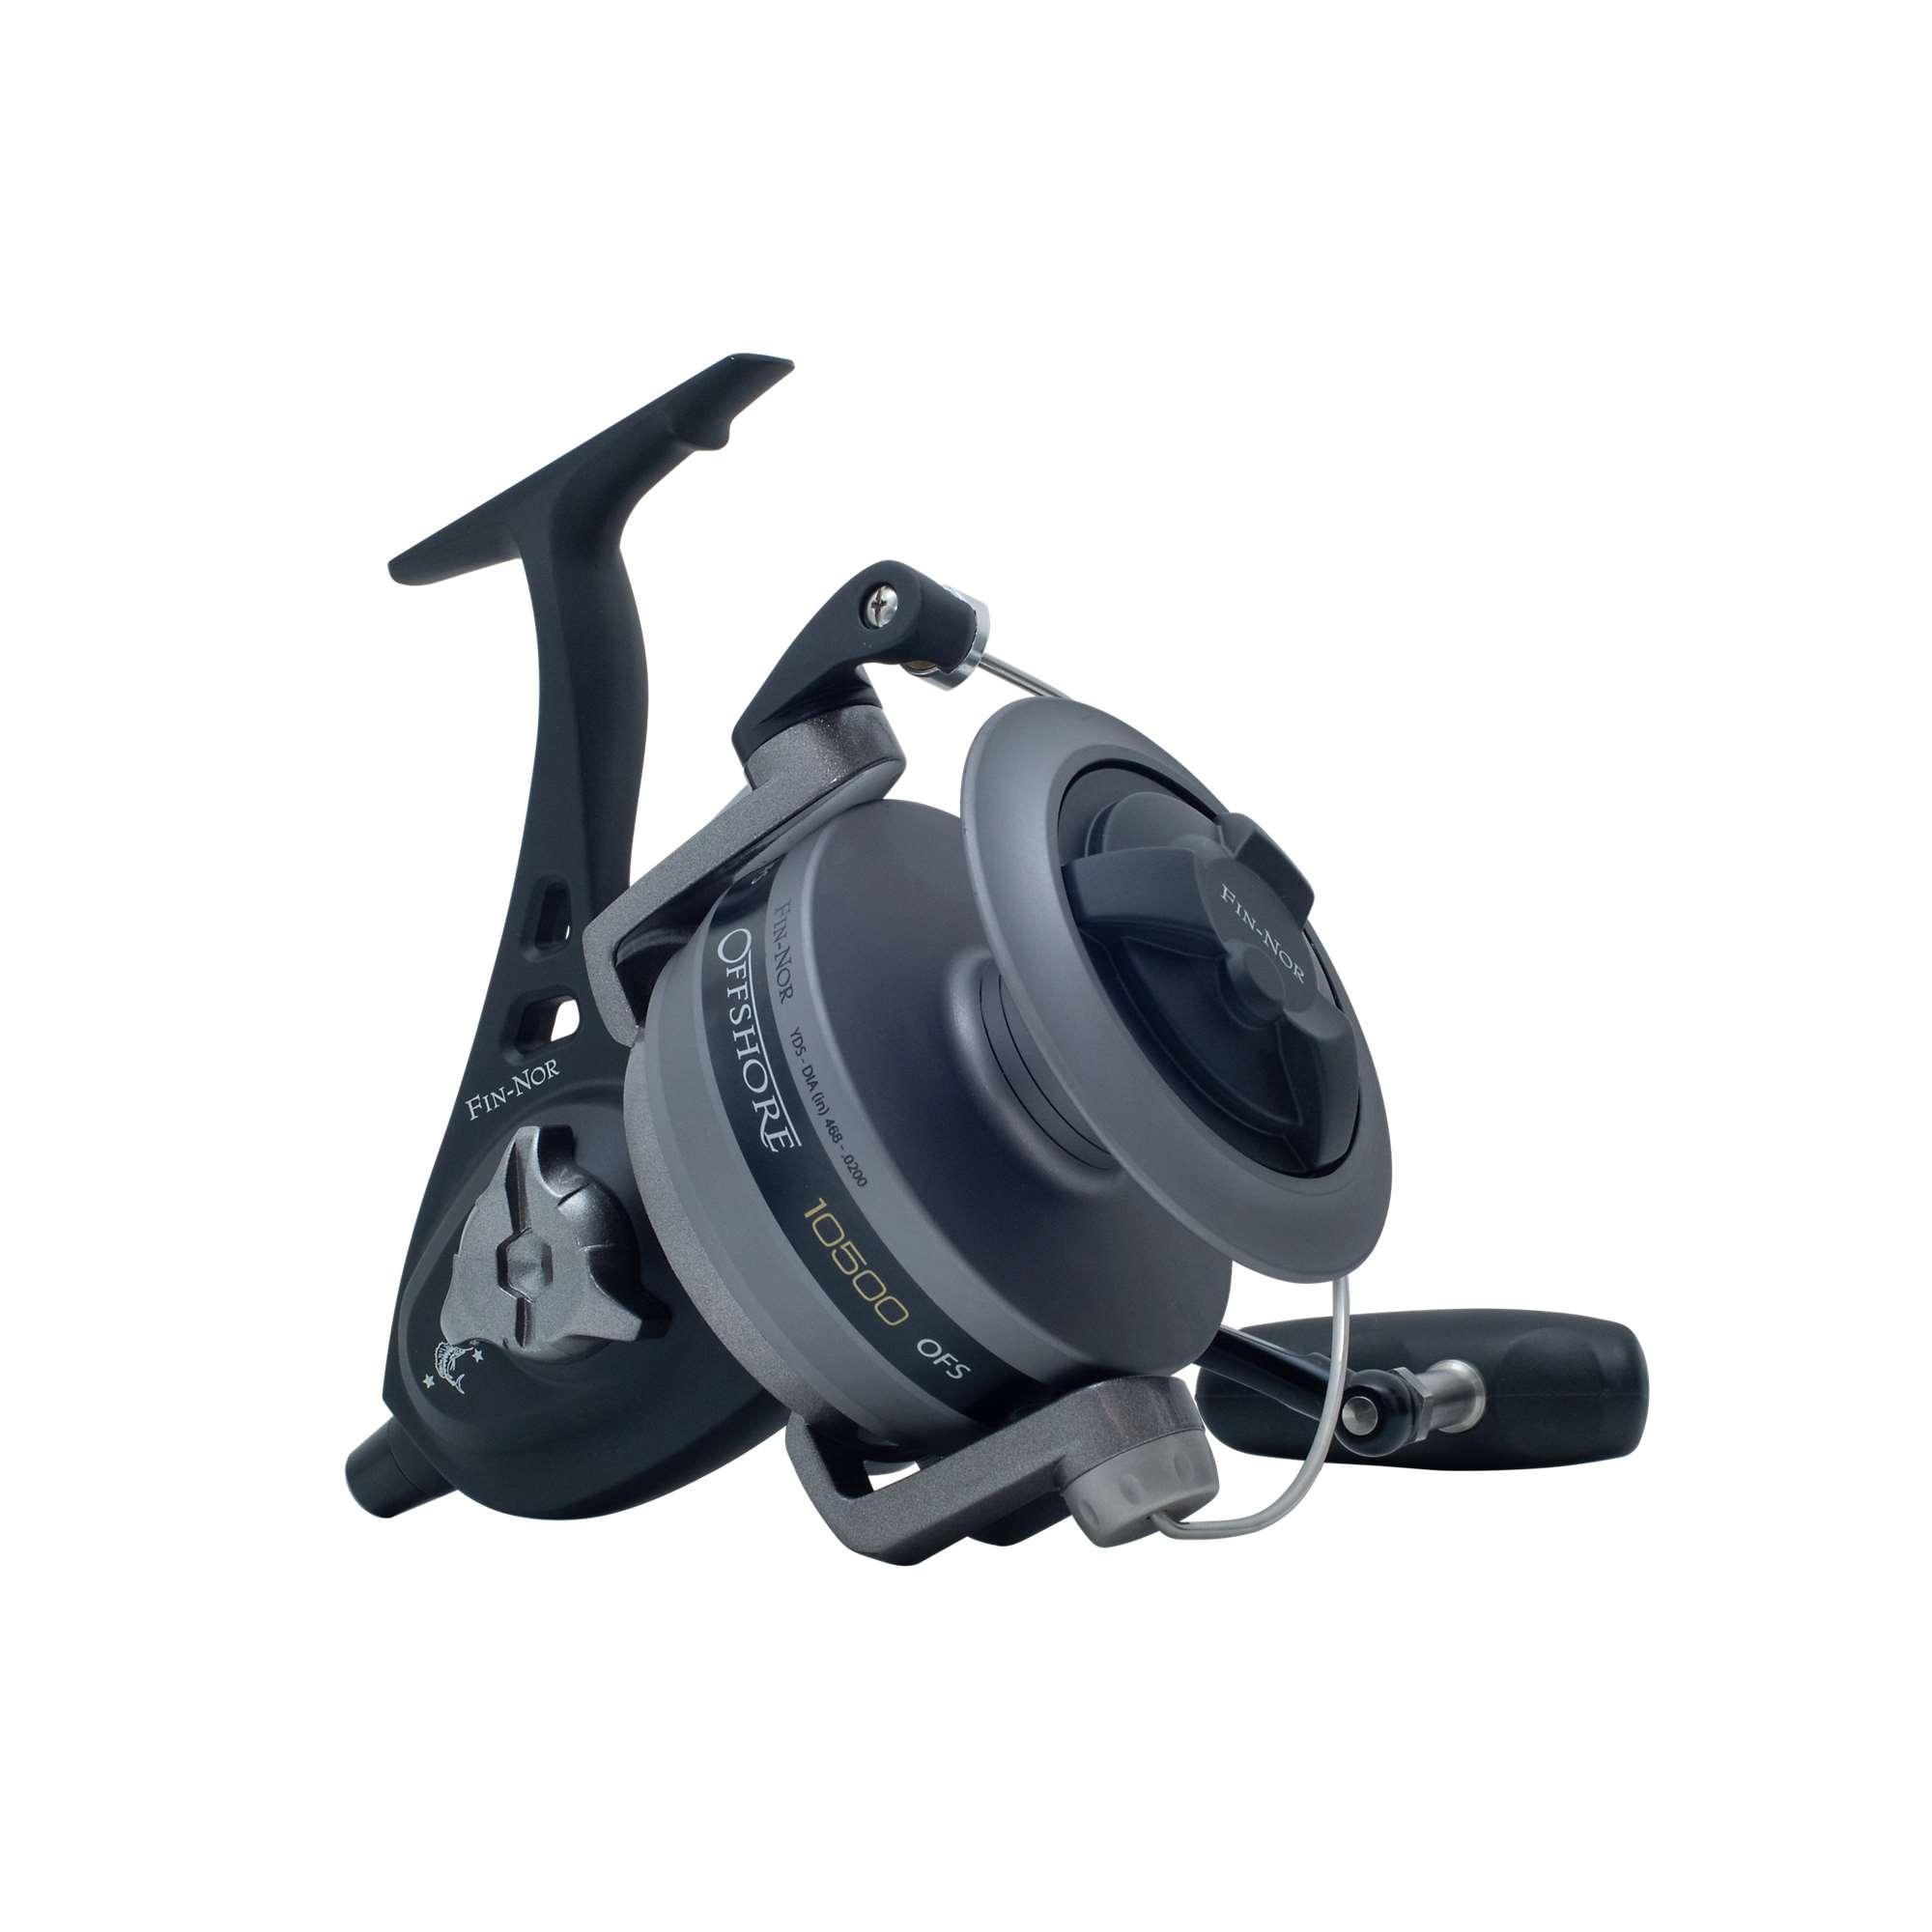 Fin-Nor Offshore 7500 Spin Reel